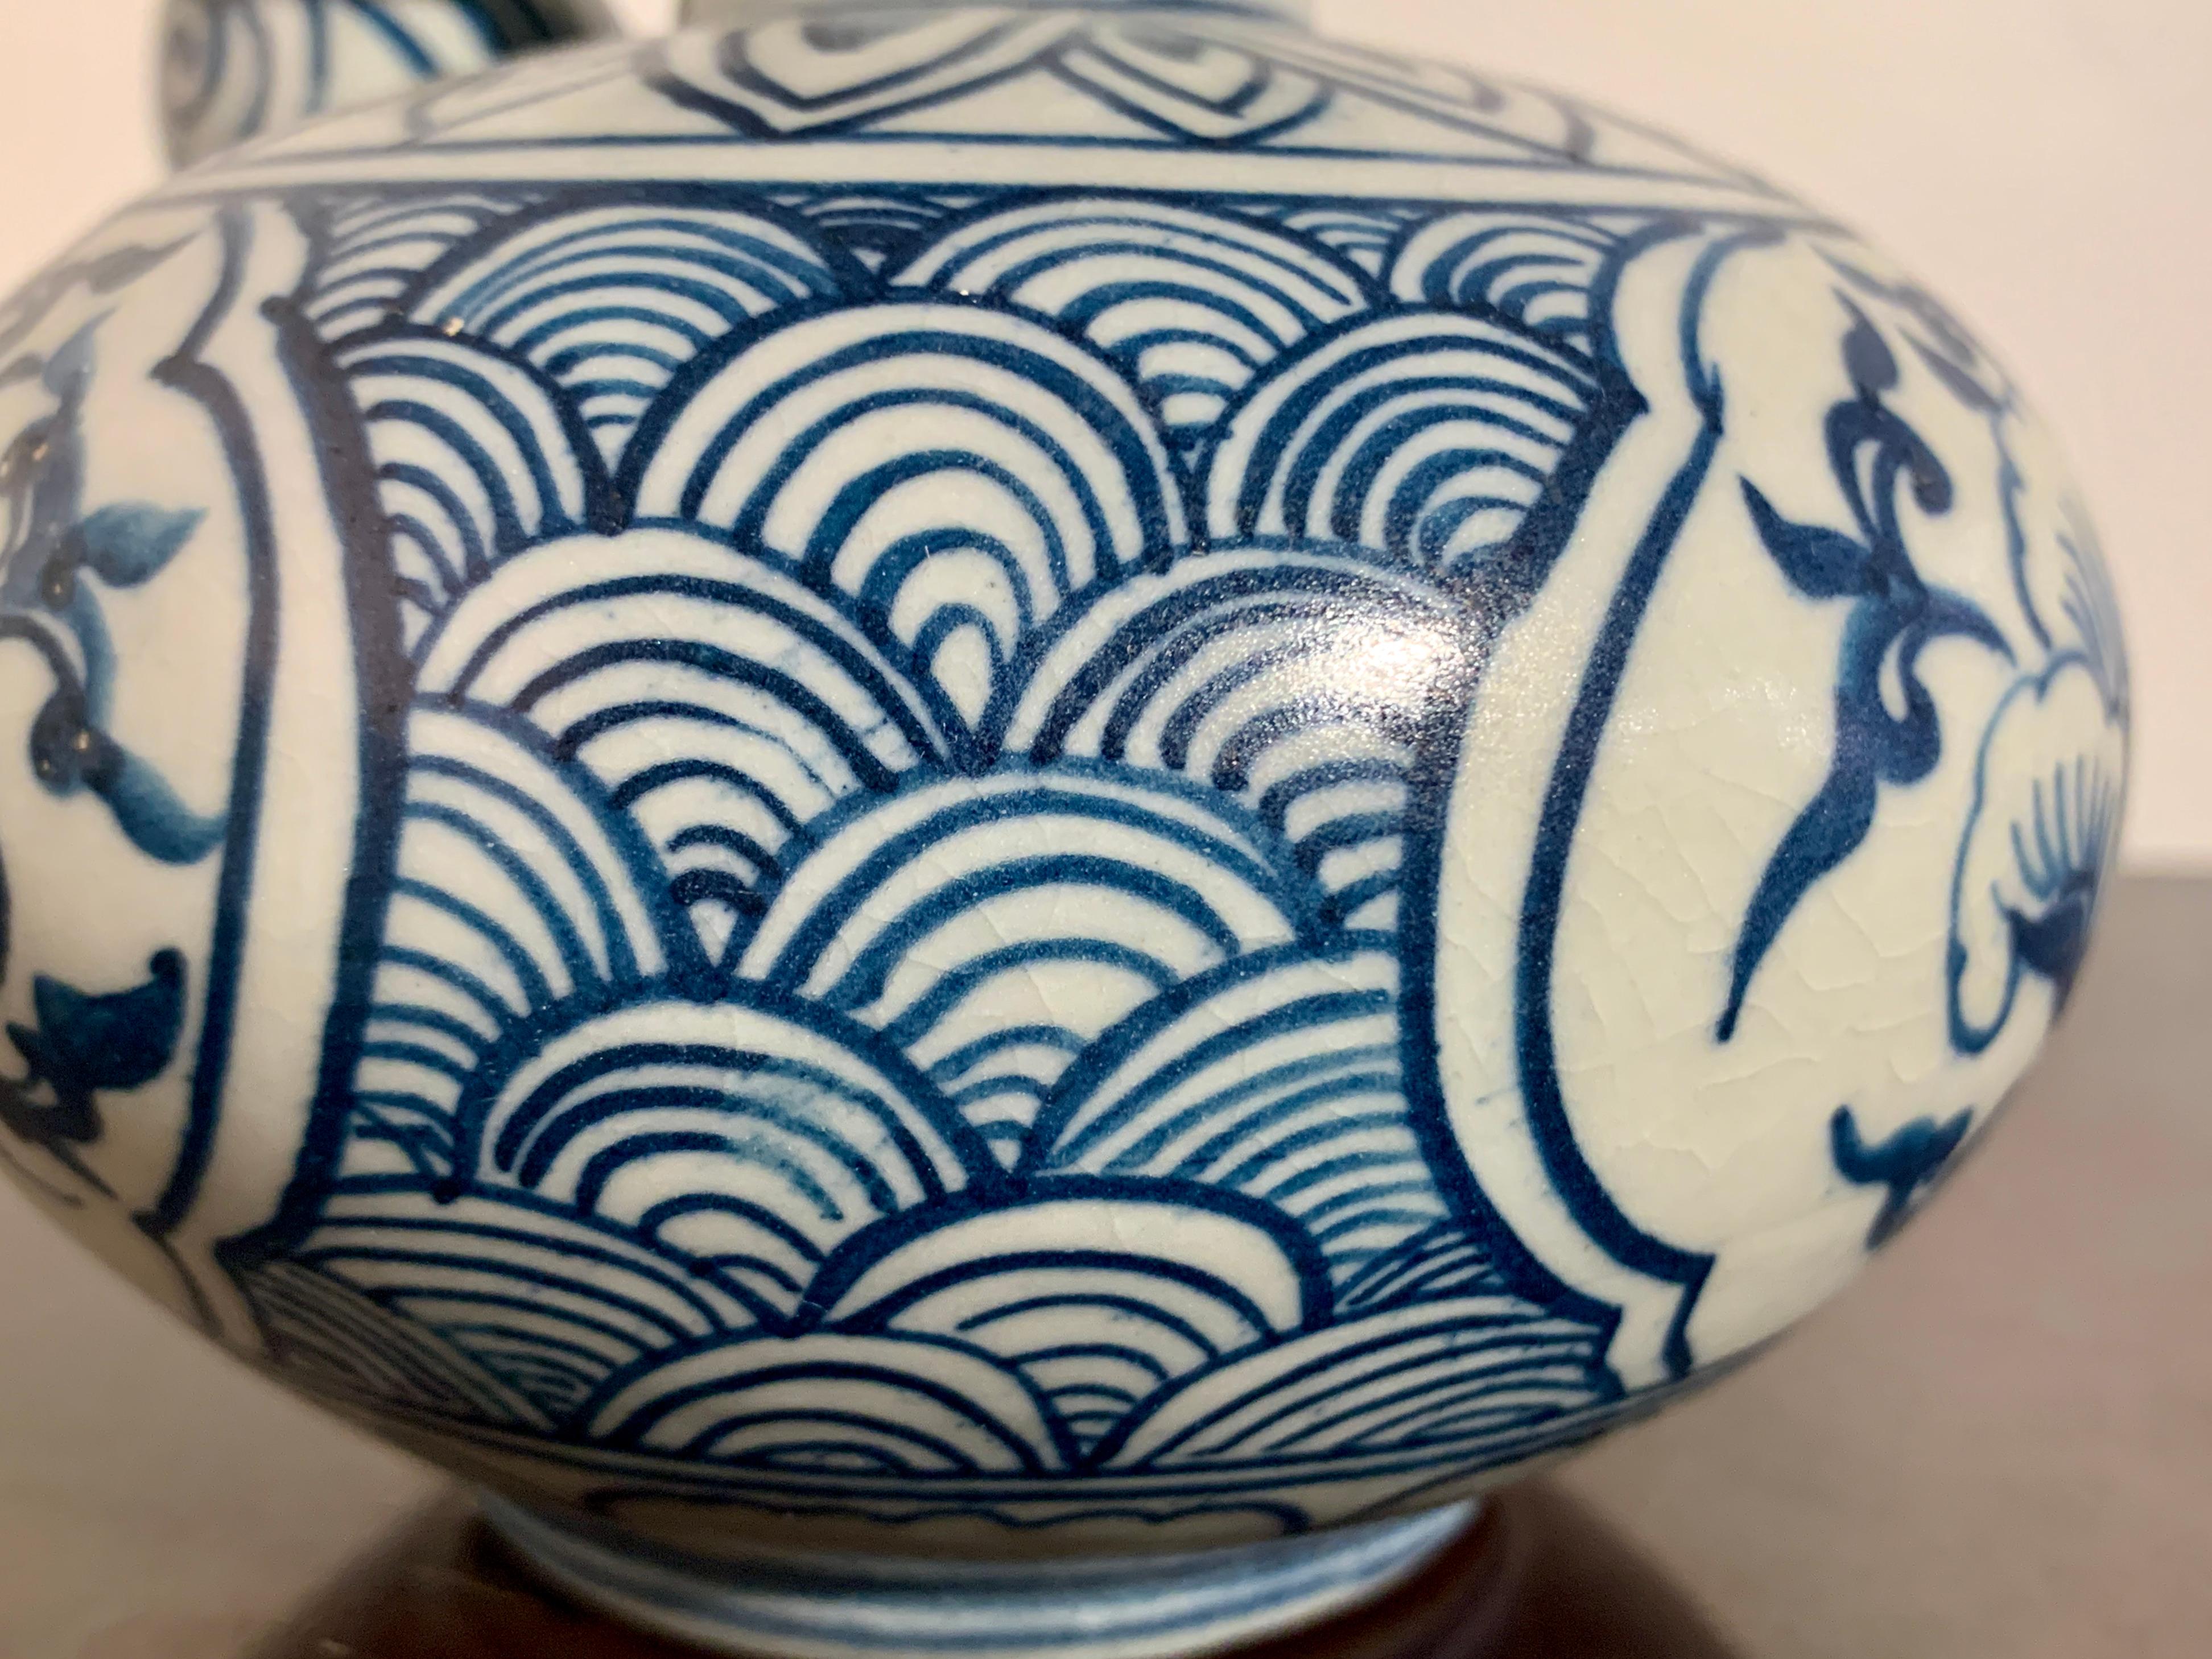 Porcelain Small Vietnamese Kendi with Blue and White Design, 15th-16th Century, Vietnam